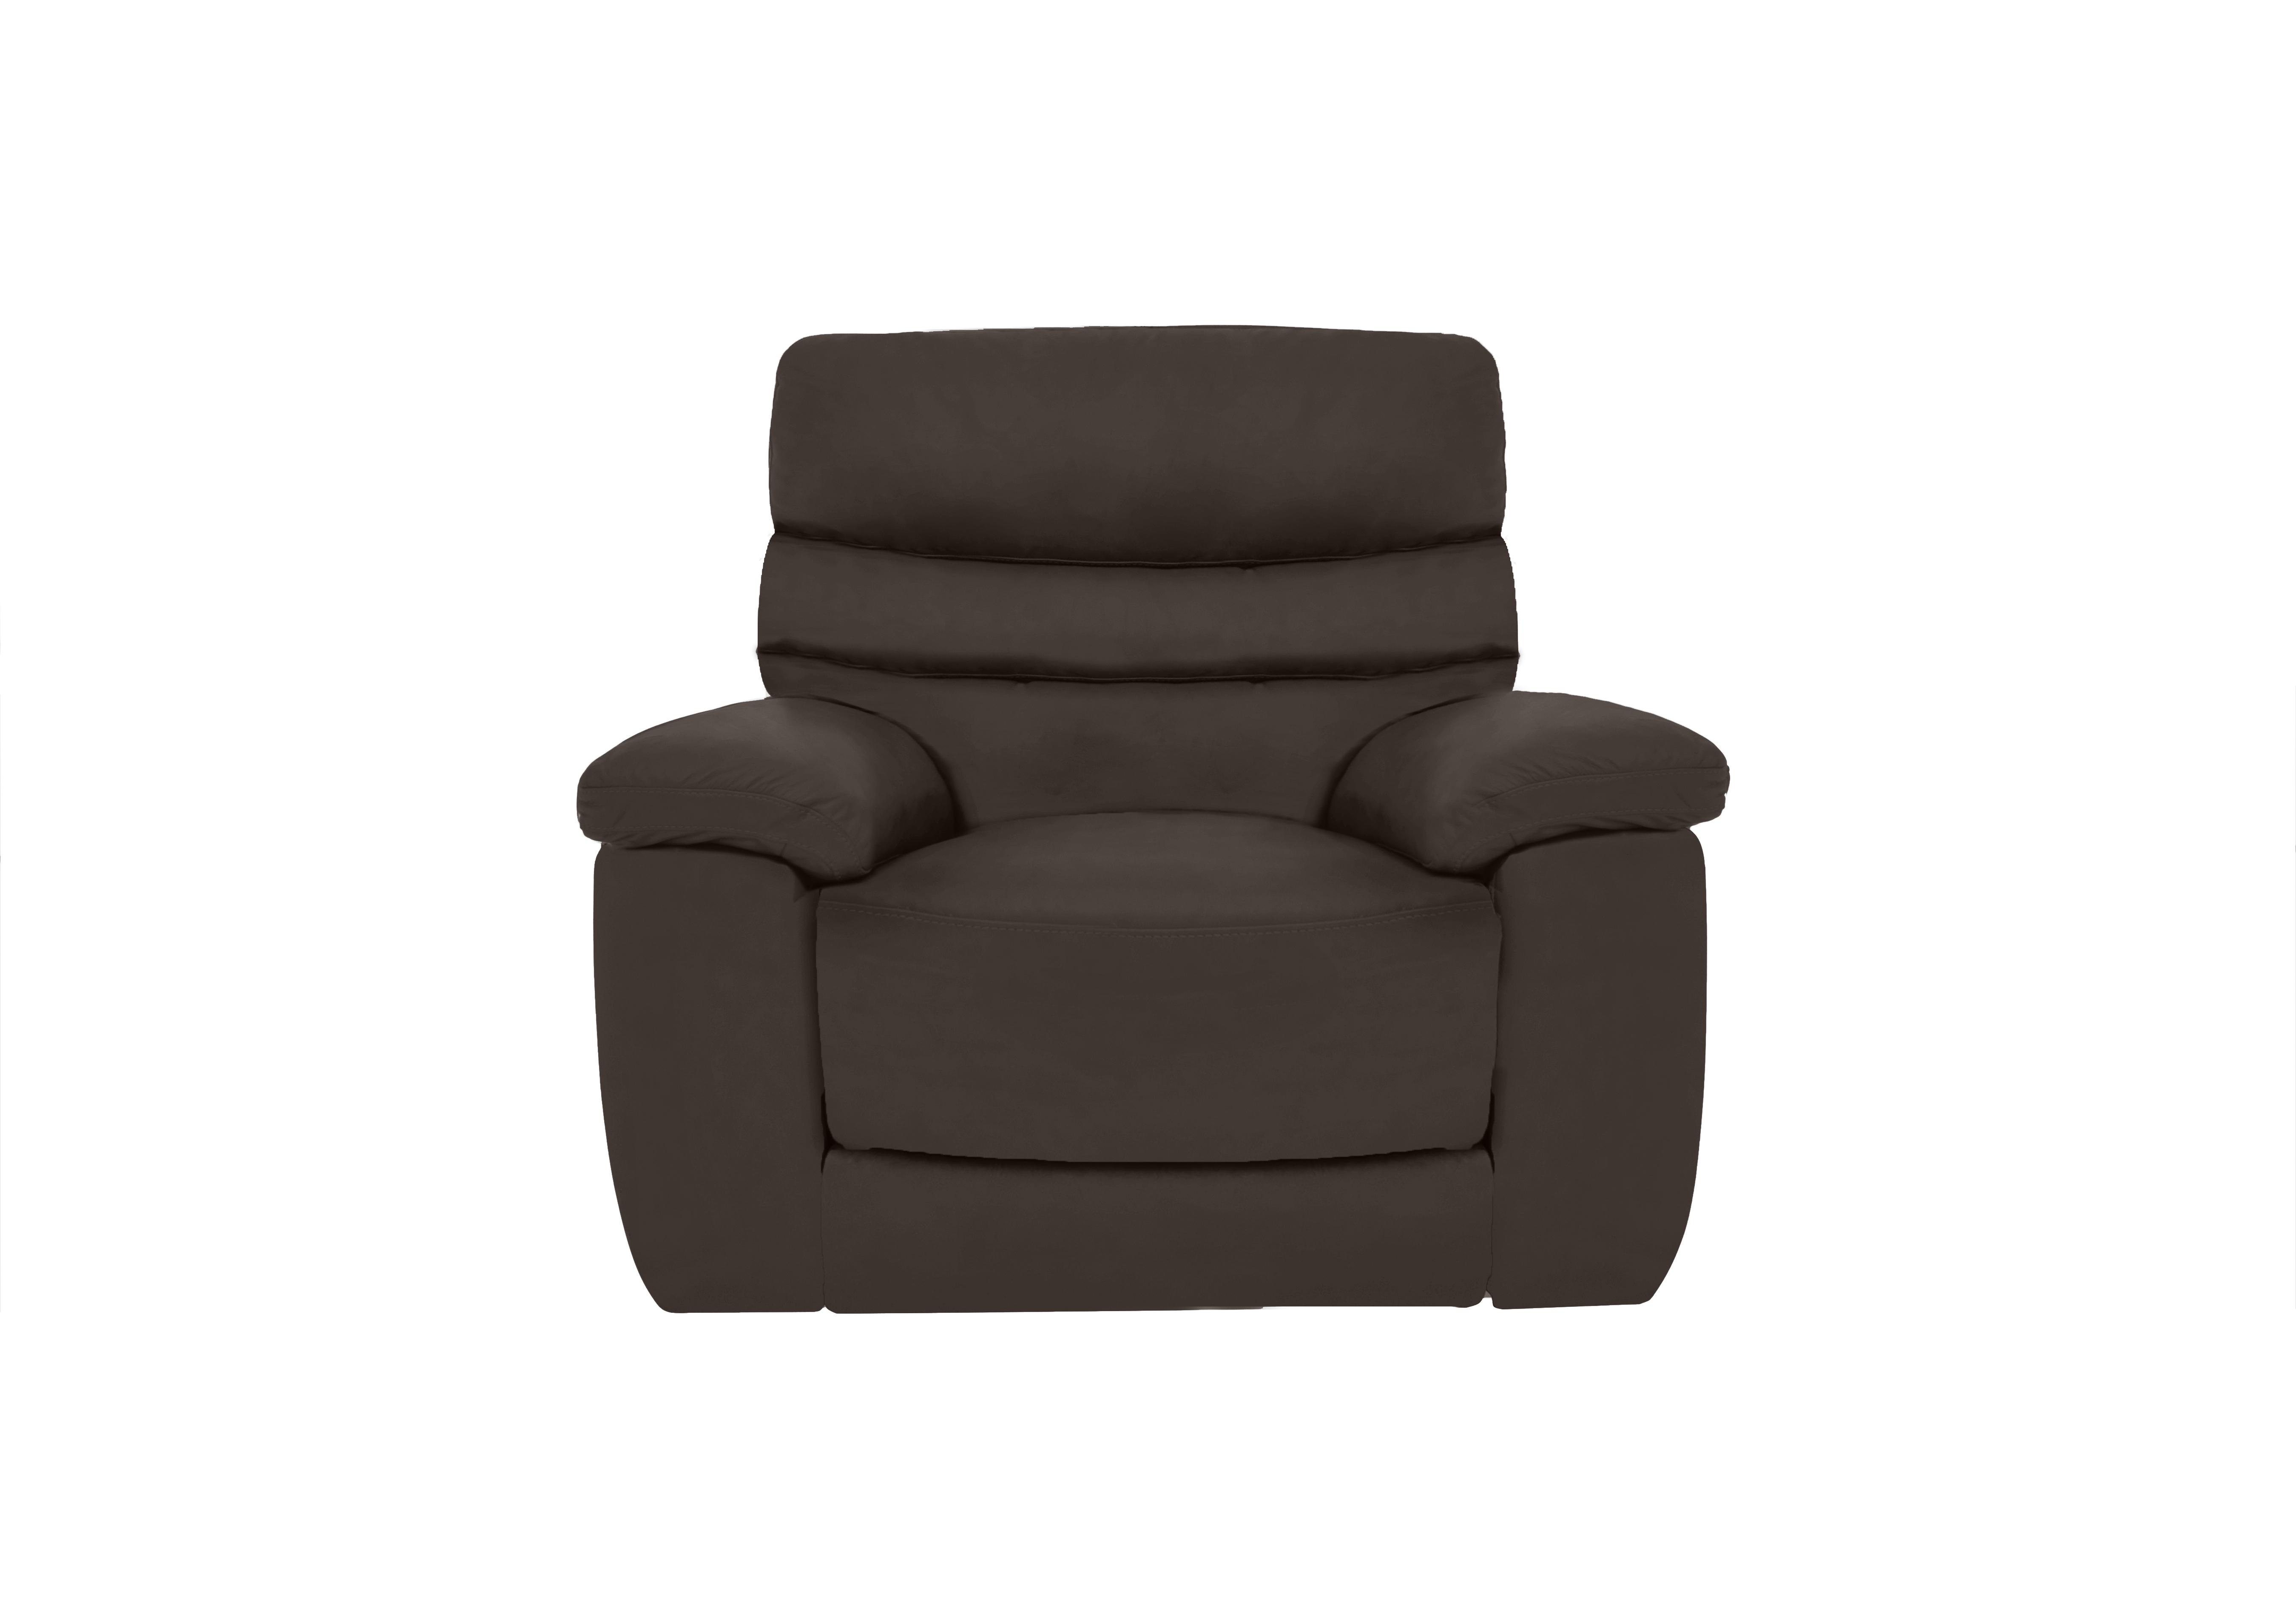 Nimbus Leather Power Recliner Chair with Power Headrest and Power Lumbar in Bx-037c Walnut on Furniture Village